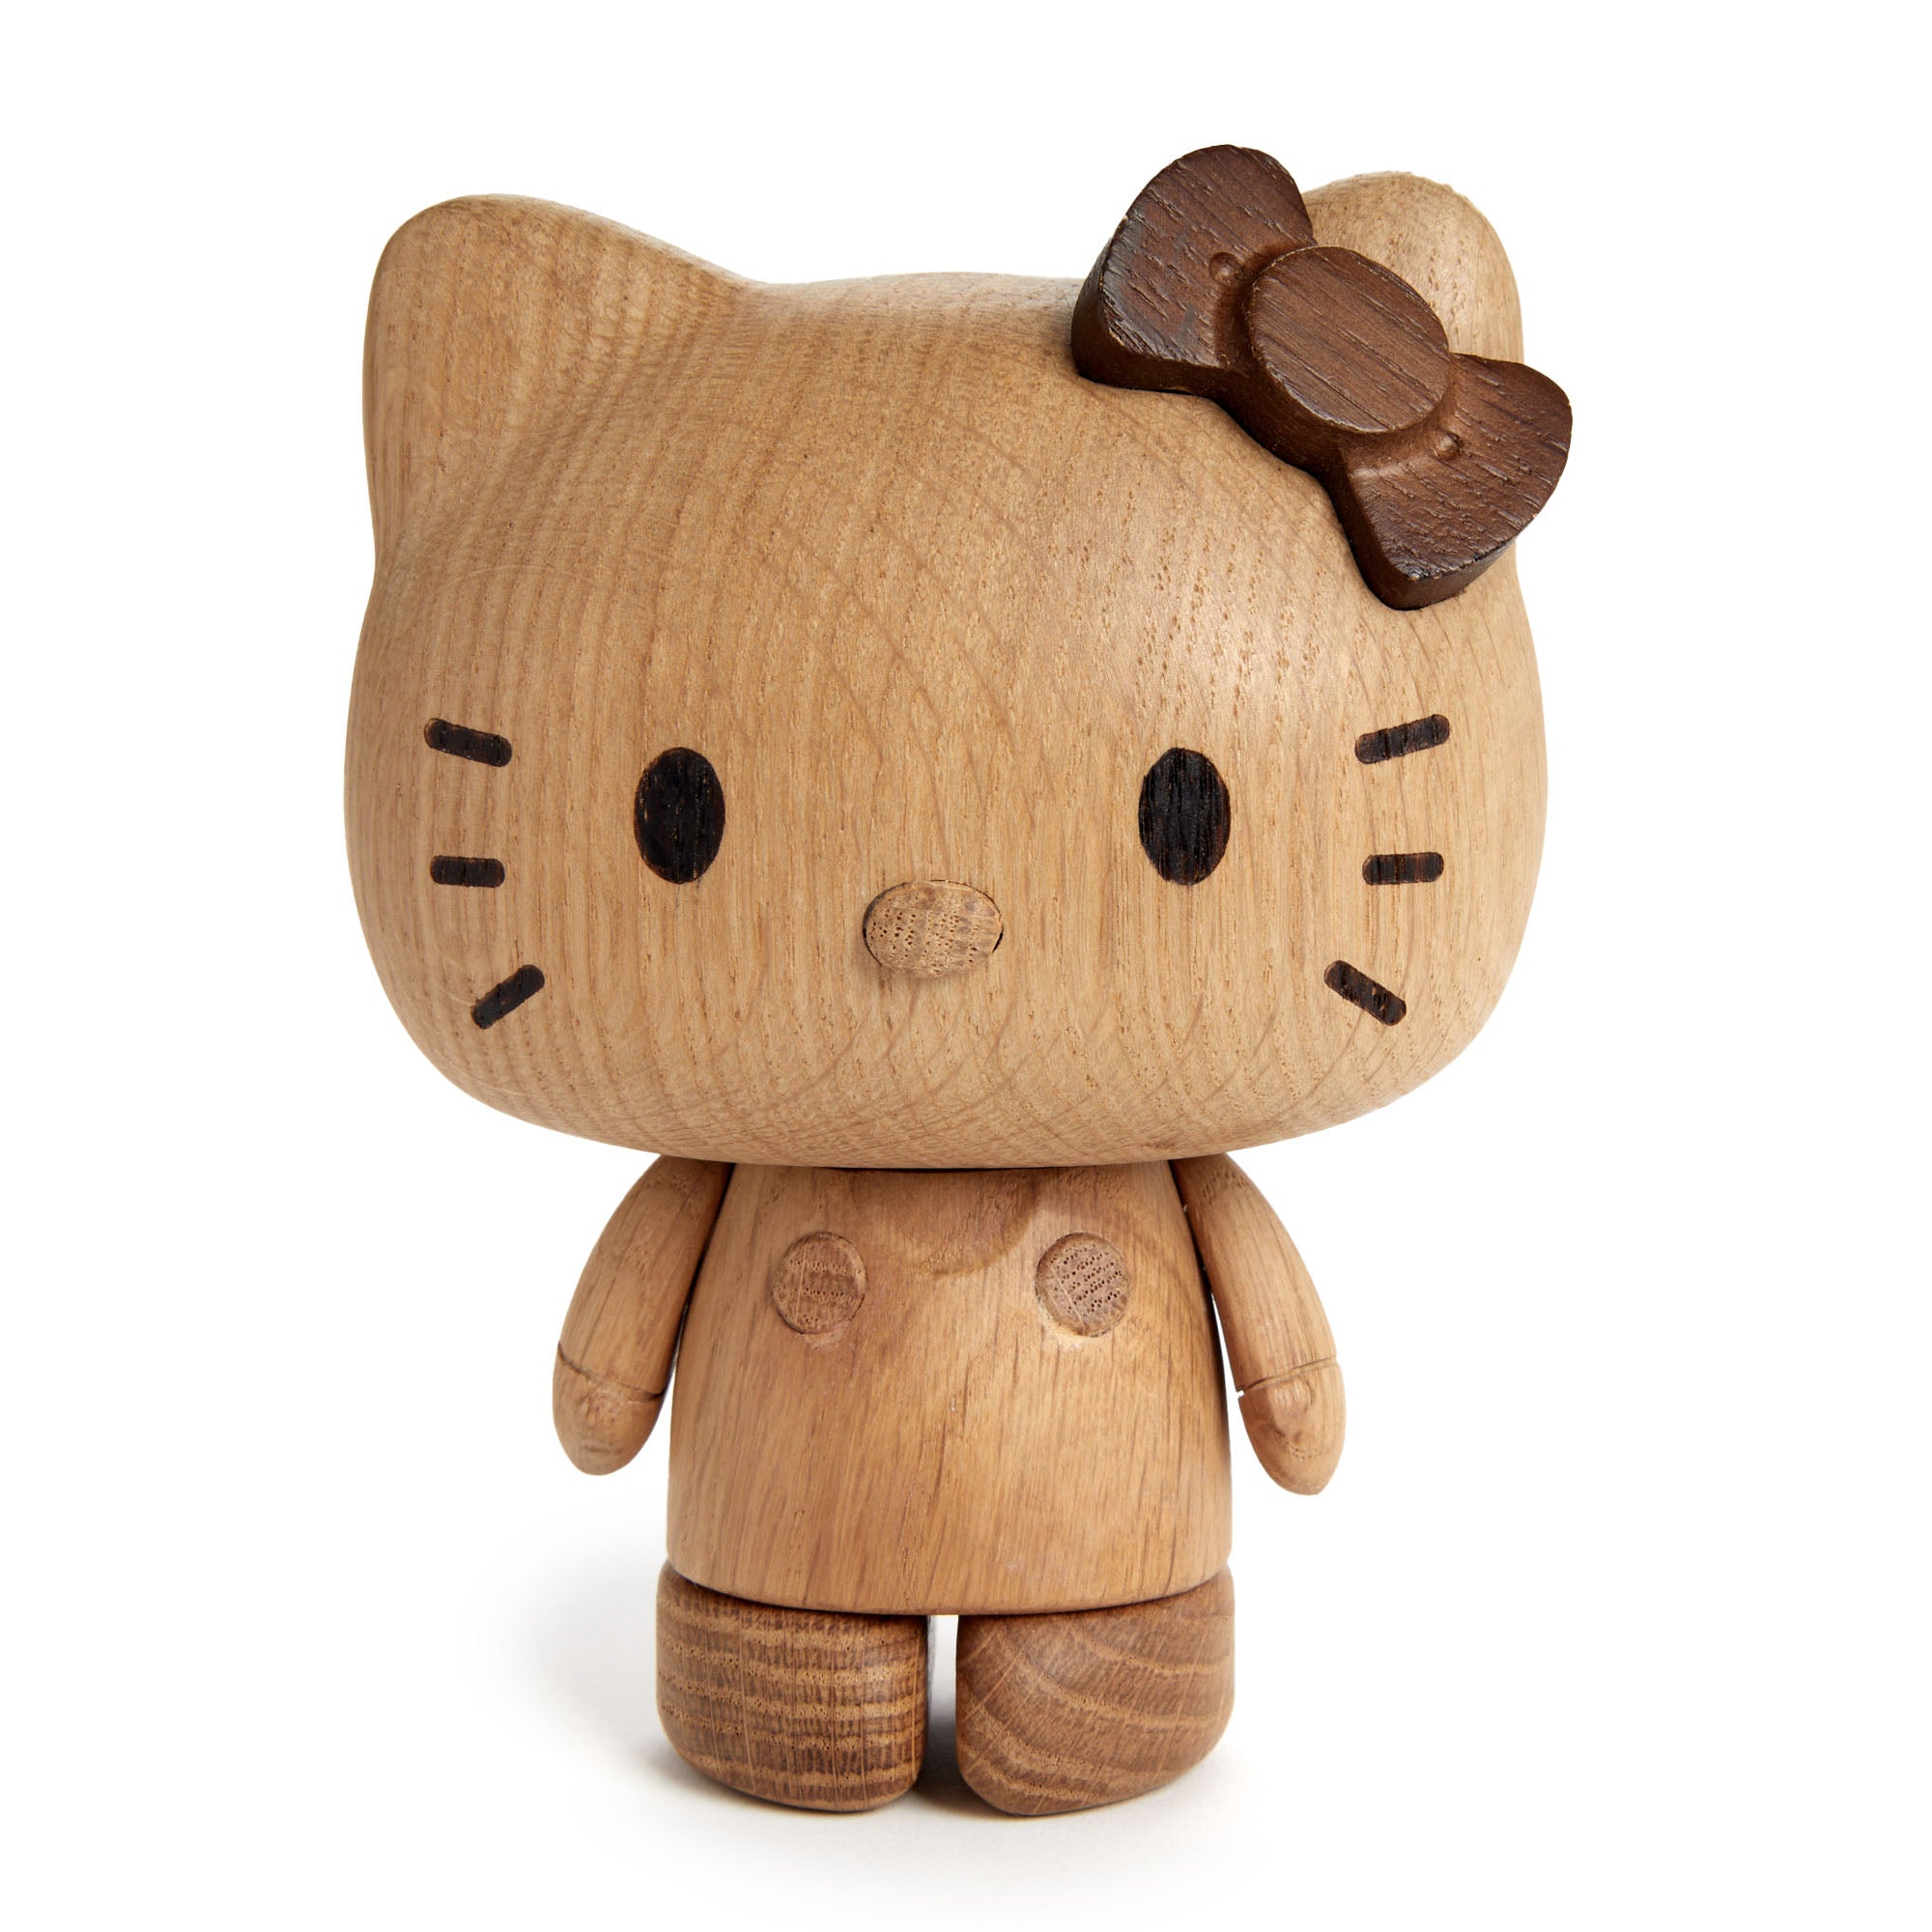 Hello Kitty Returns to Build-A-Bear Workshop - The Toy Insider